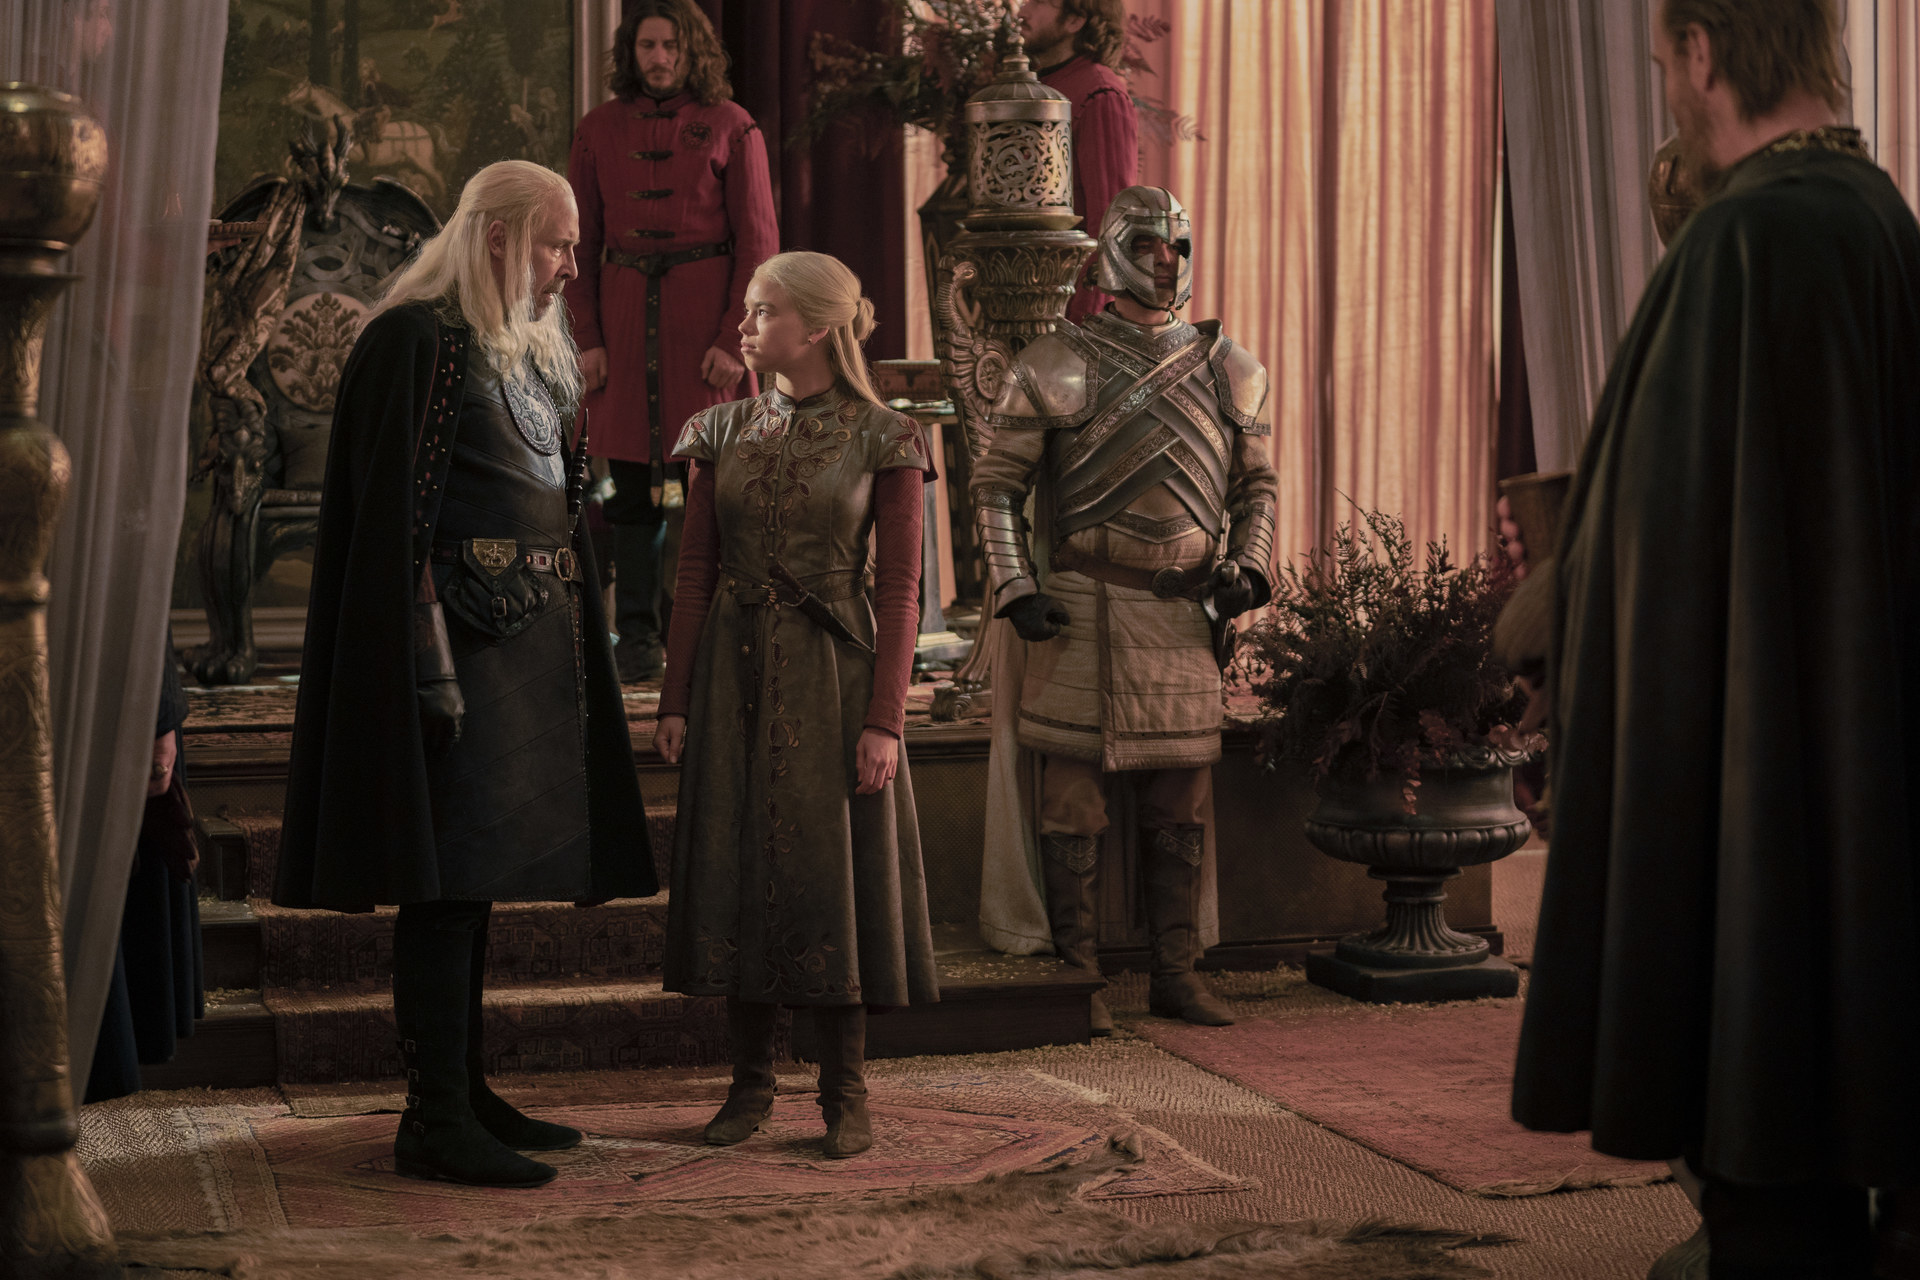 Rhaenyra and Viserys talk in their camp — perhaps of marriage — while Otto Jightower looks on.